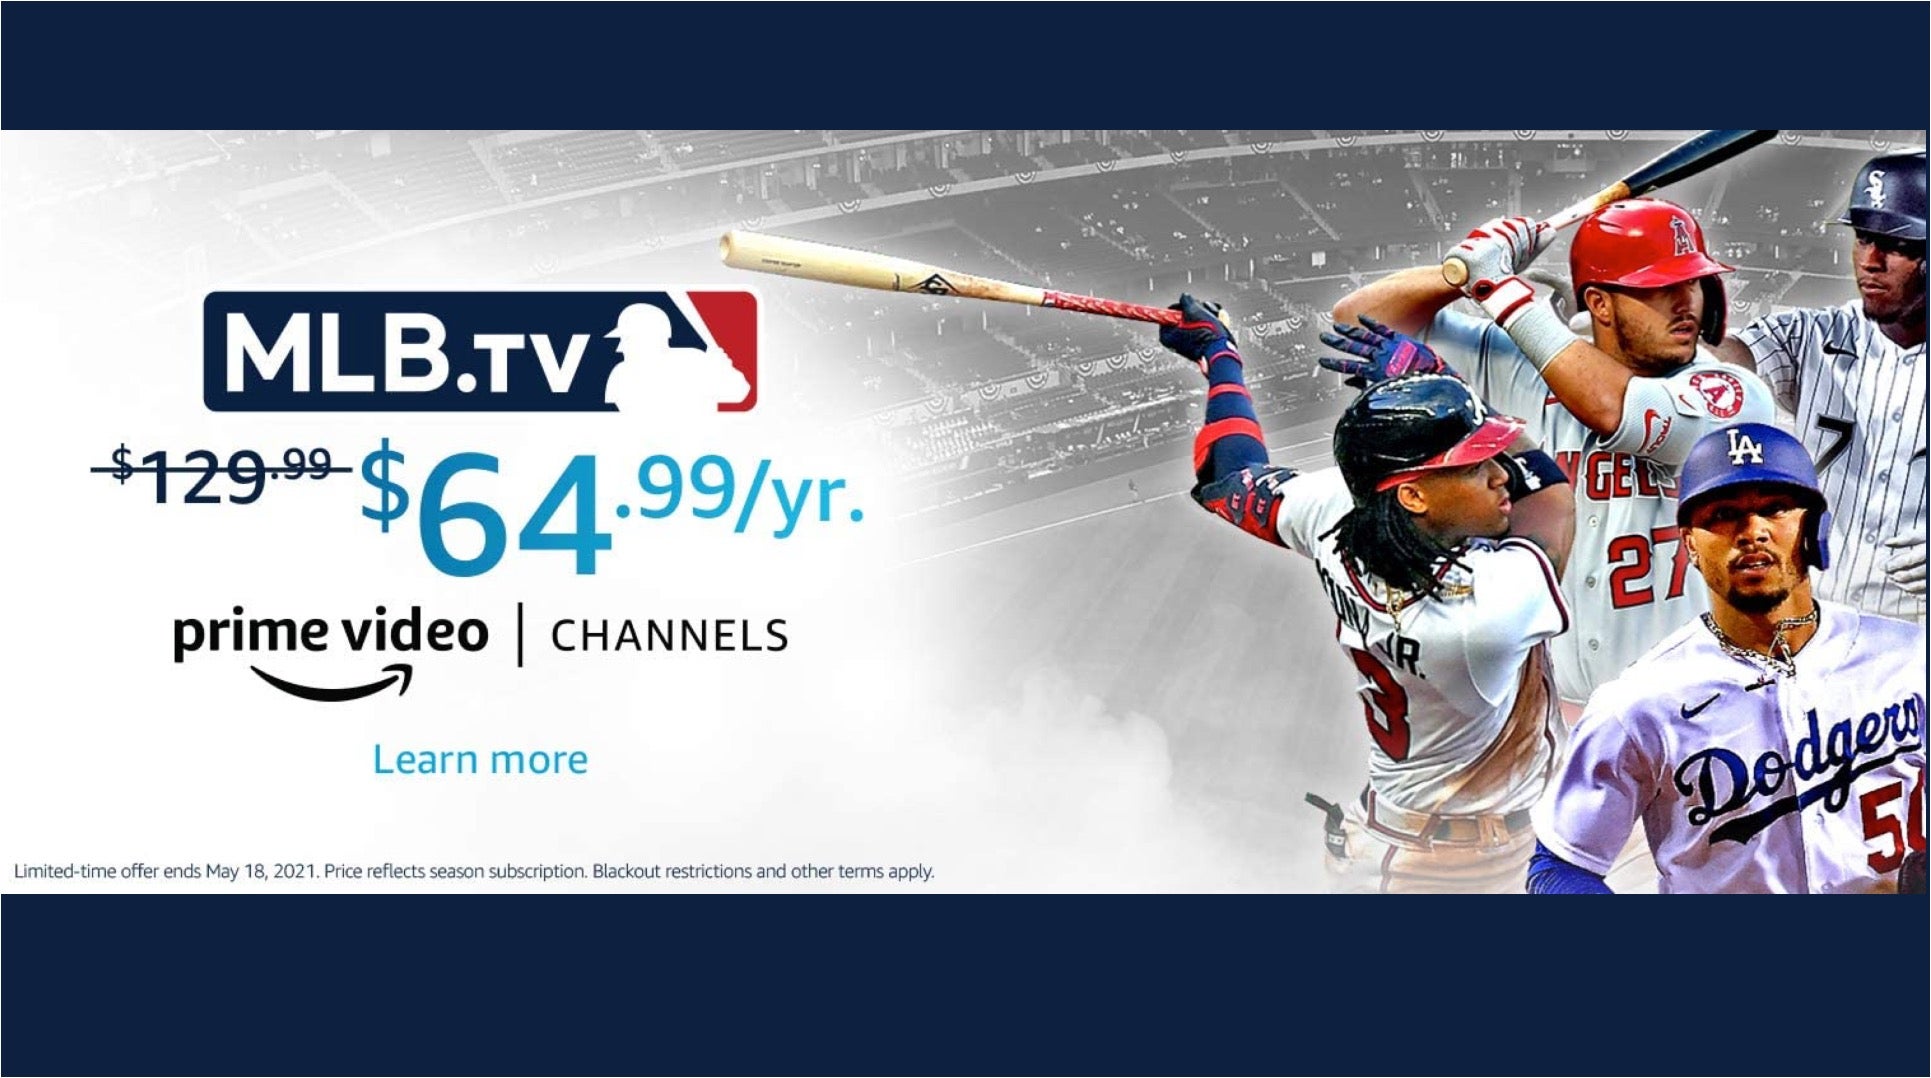 MLBTV Delays Plans to AutoRenew Subscriptions Until New CBA is Finalized   The Streamable